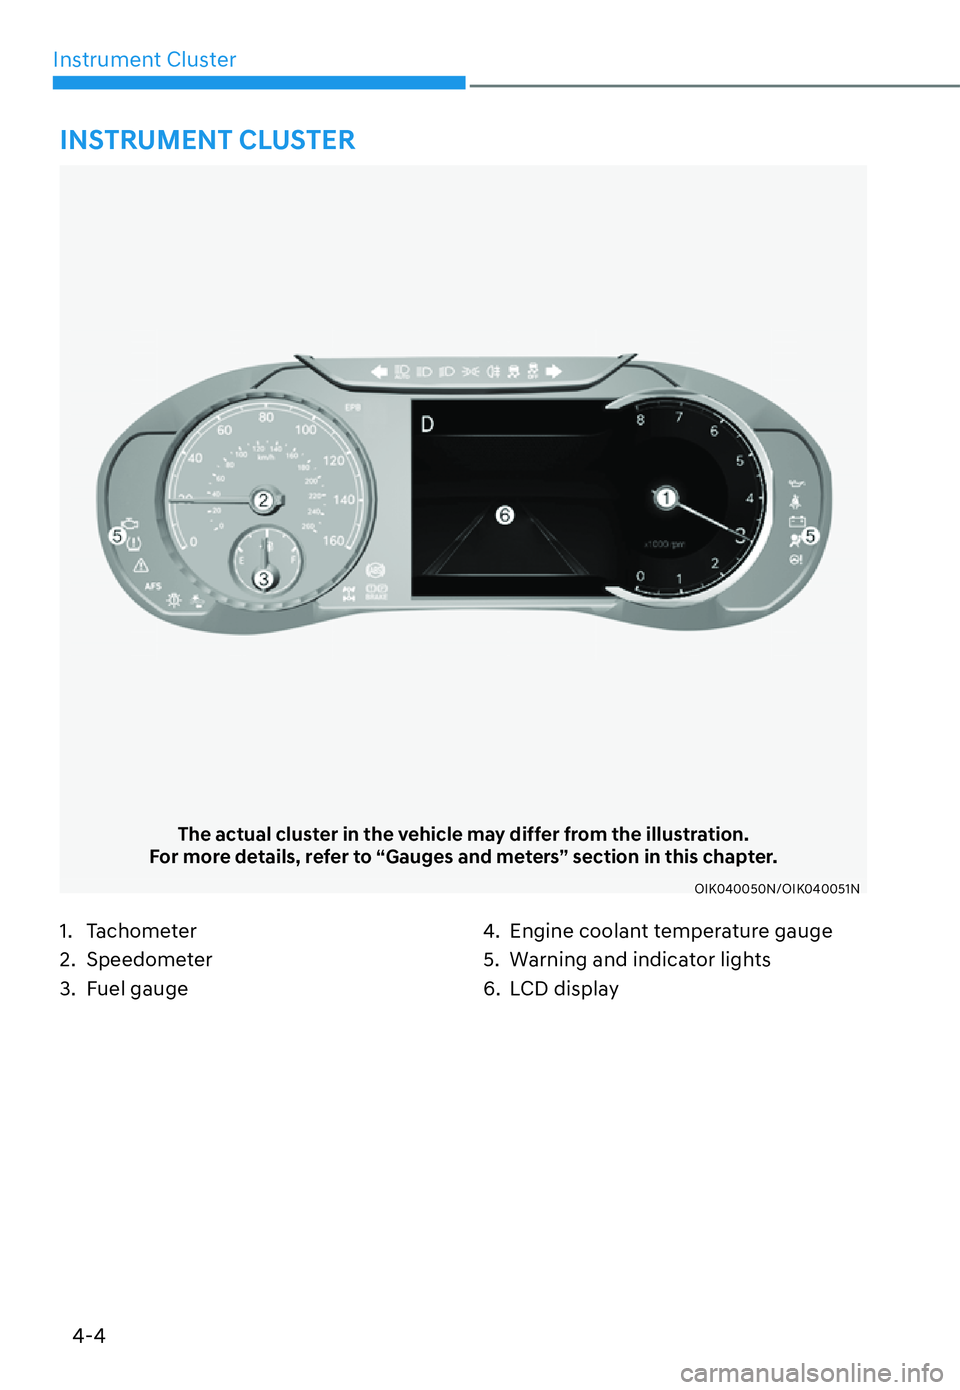 HYUNDAI GENESIS G70 2022  Owners Manual 4-4
Instrument Cluster
The actual cluster in the vehicle may differ from the illustration.
For more details, refer to “Gauges and meters” section in this chapter.
OIK040050N/OIK040051N
1. Tachomet